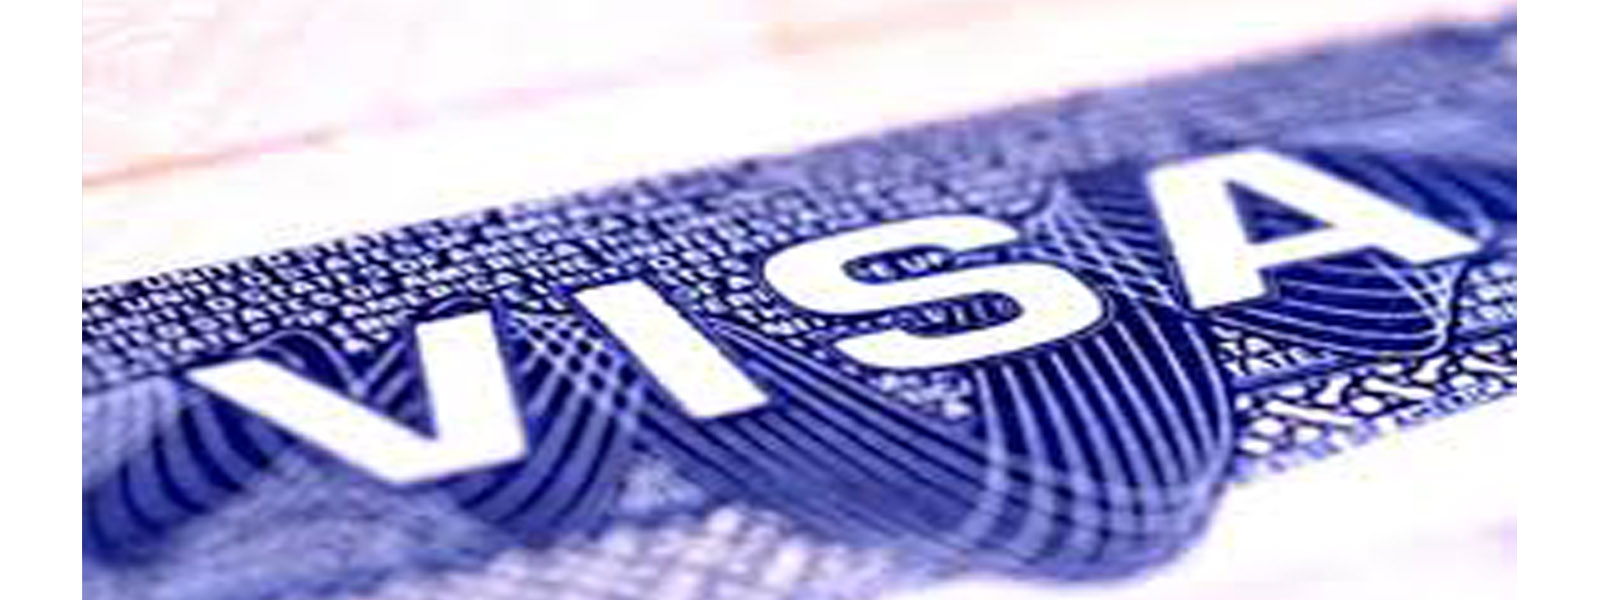 Sri Lanka to implement a new visa policy